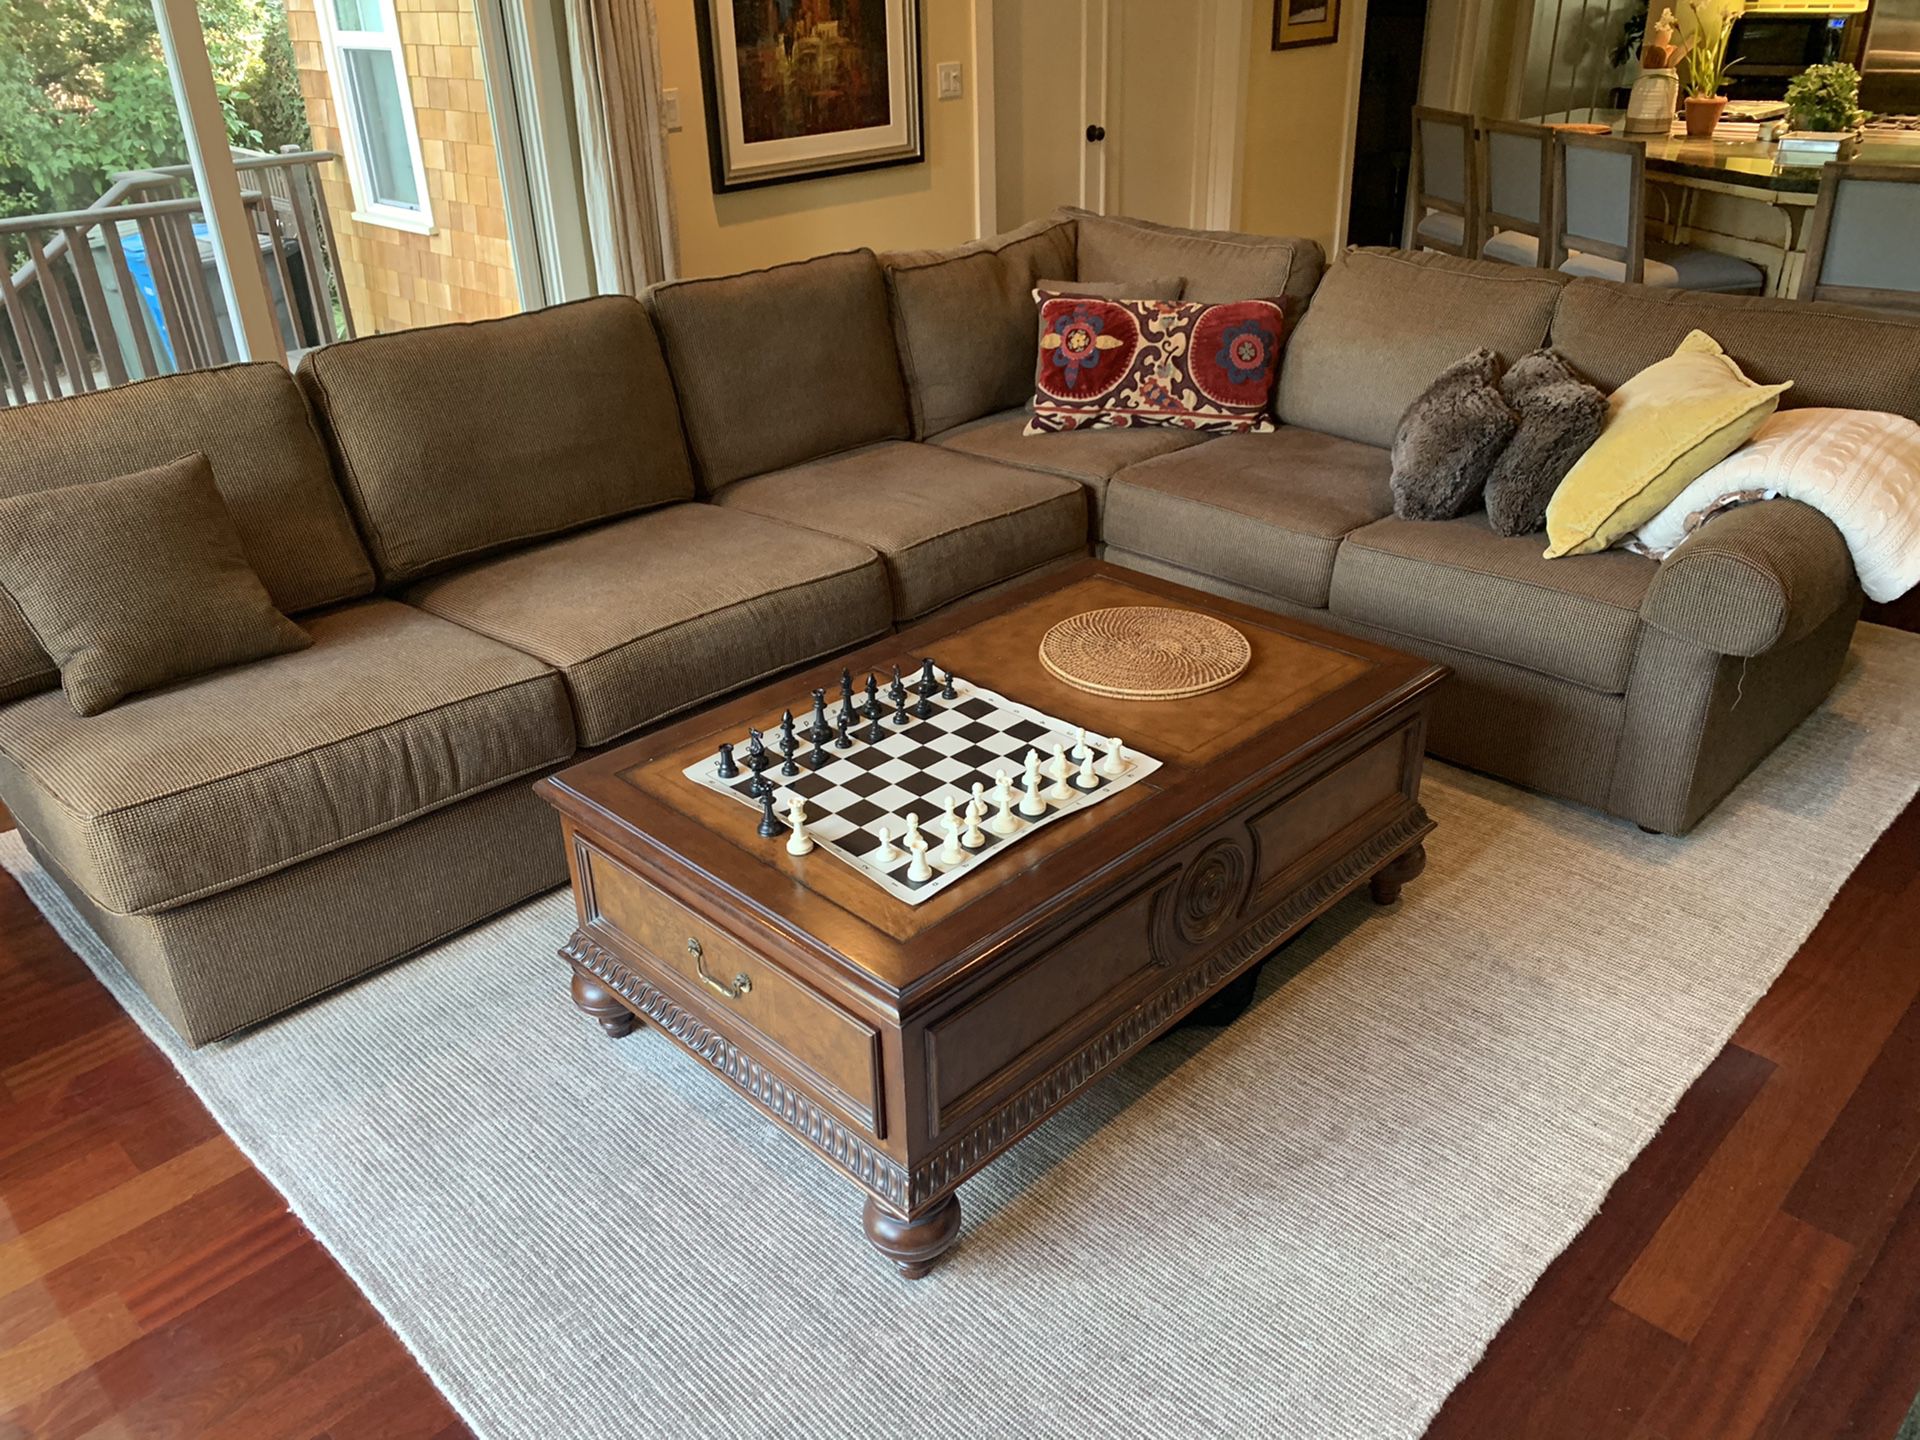 Ethan Allen Sectional Sofa and Coffee Table!